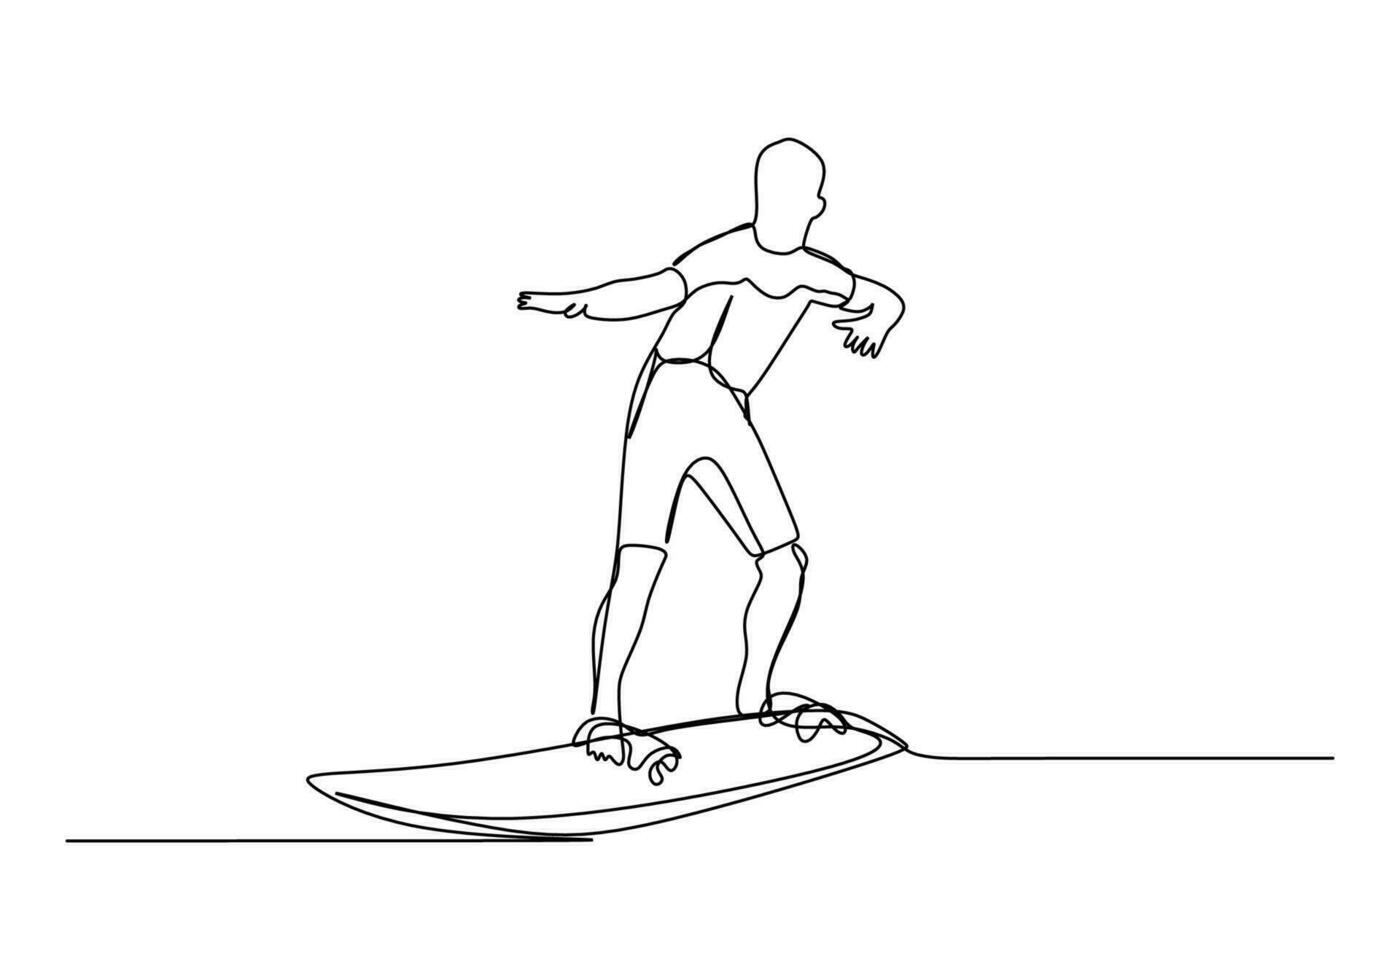 Surfing Costume One Line Drawing Continuous Hand Drawn Sport Theme vector